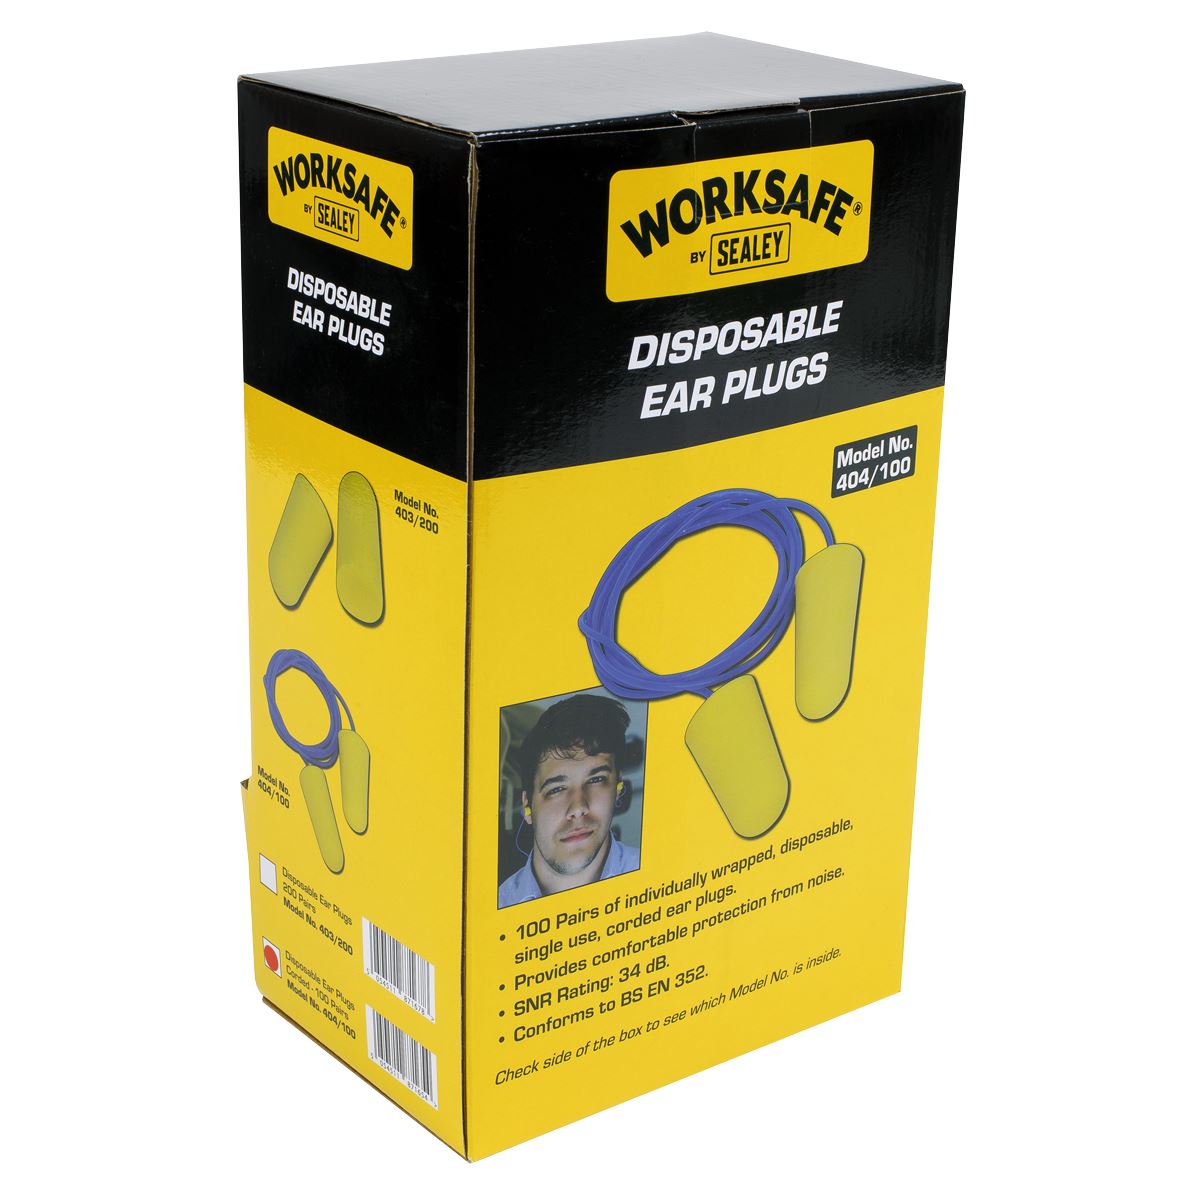 Worksafe by Sealey Ear Plugs Disposable Corded Pack of 100 Pairs